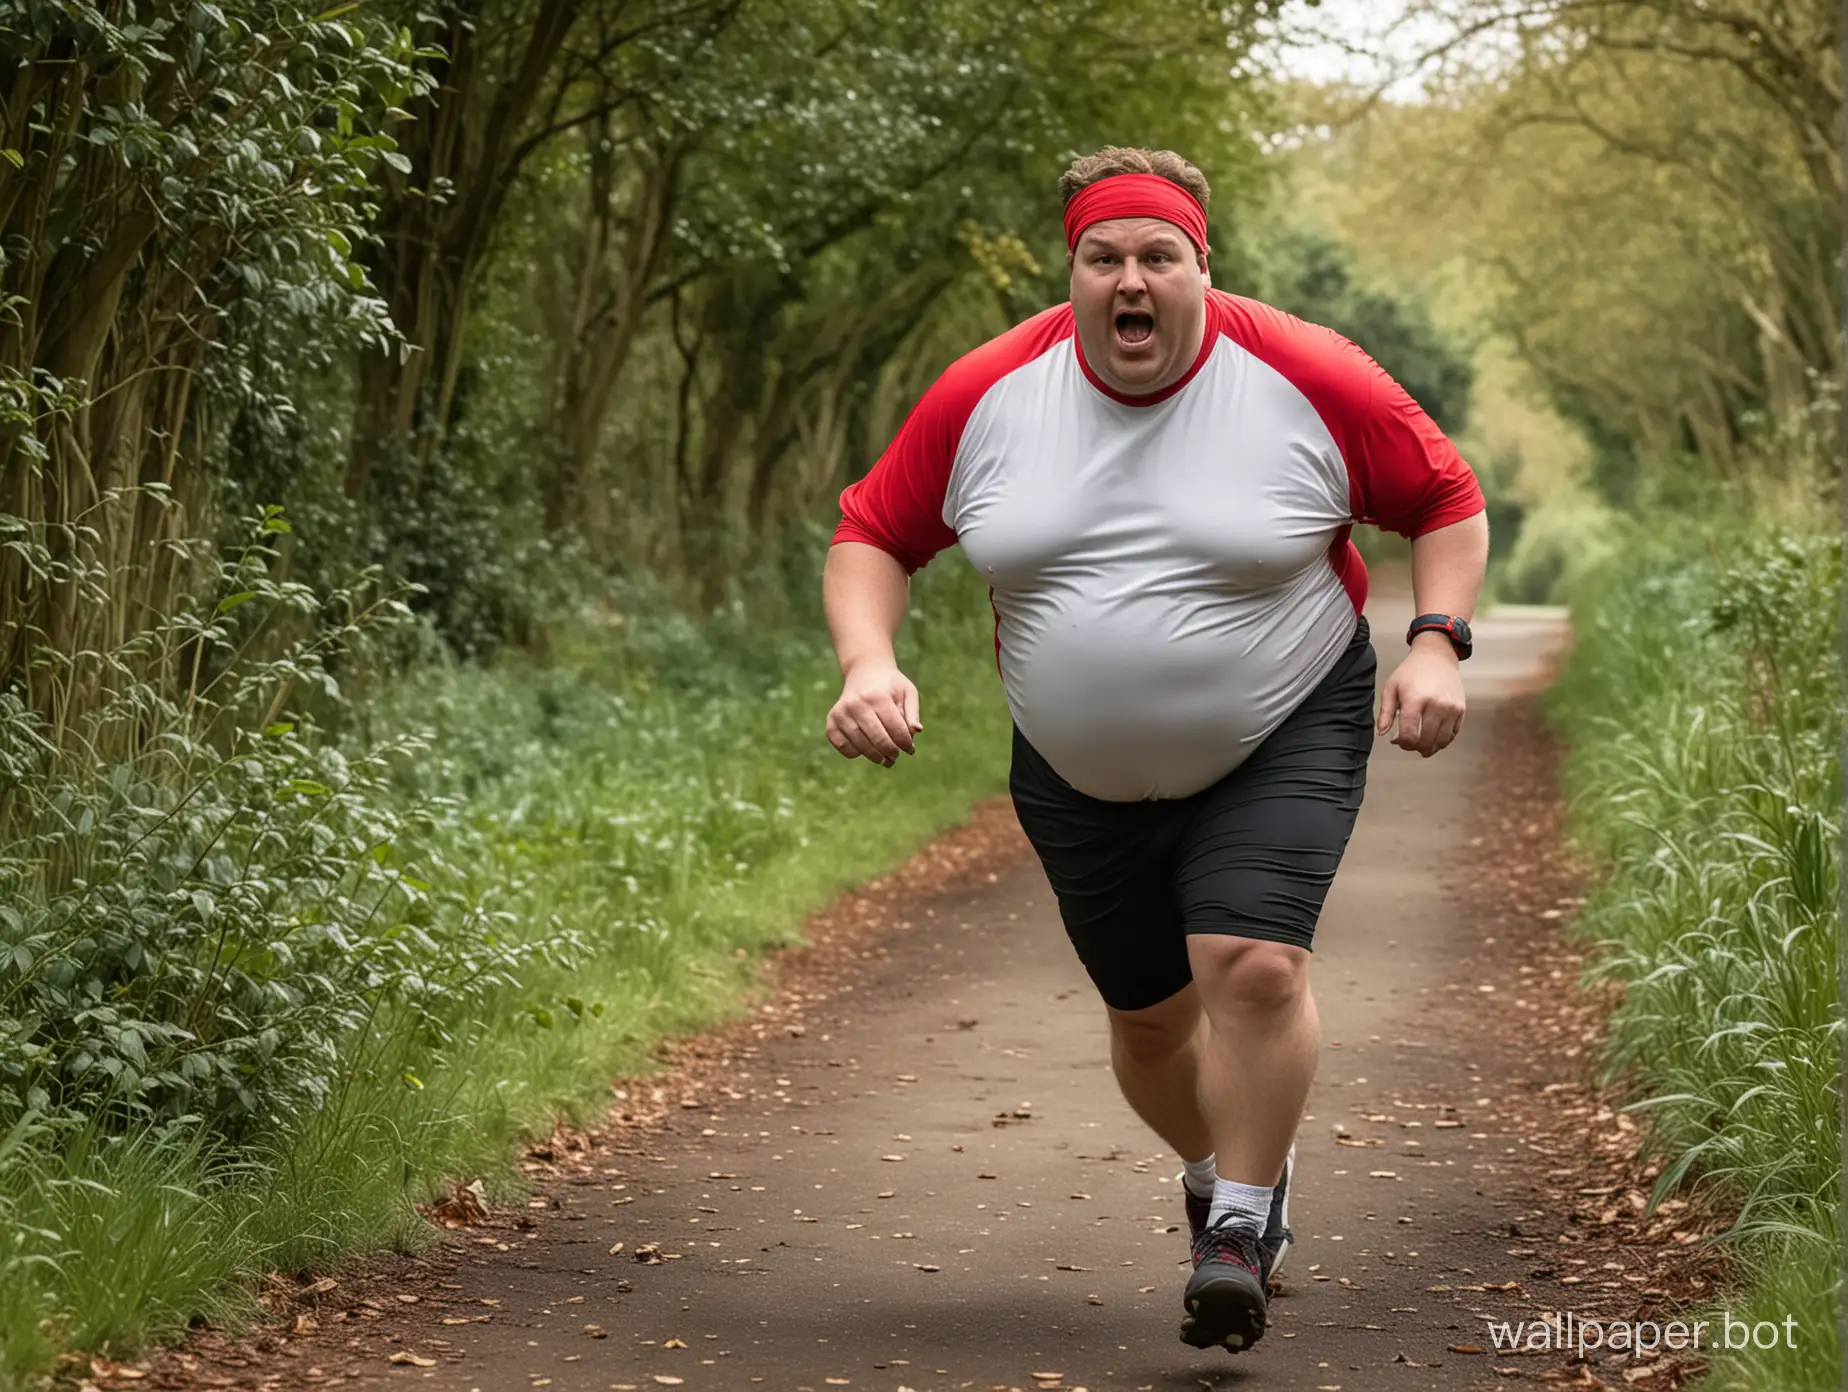 Obese-Jogger-in-Struggle-on-a-Picturesque-English-Country-Lane